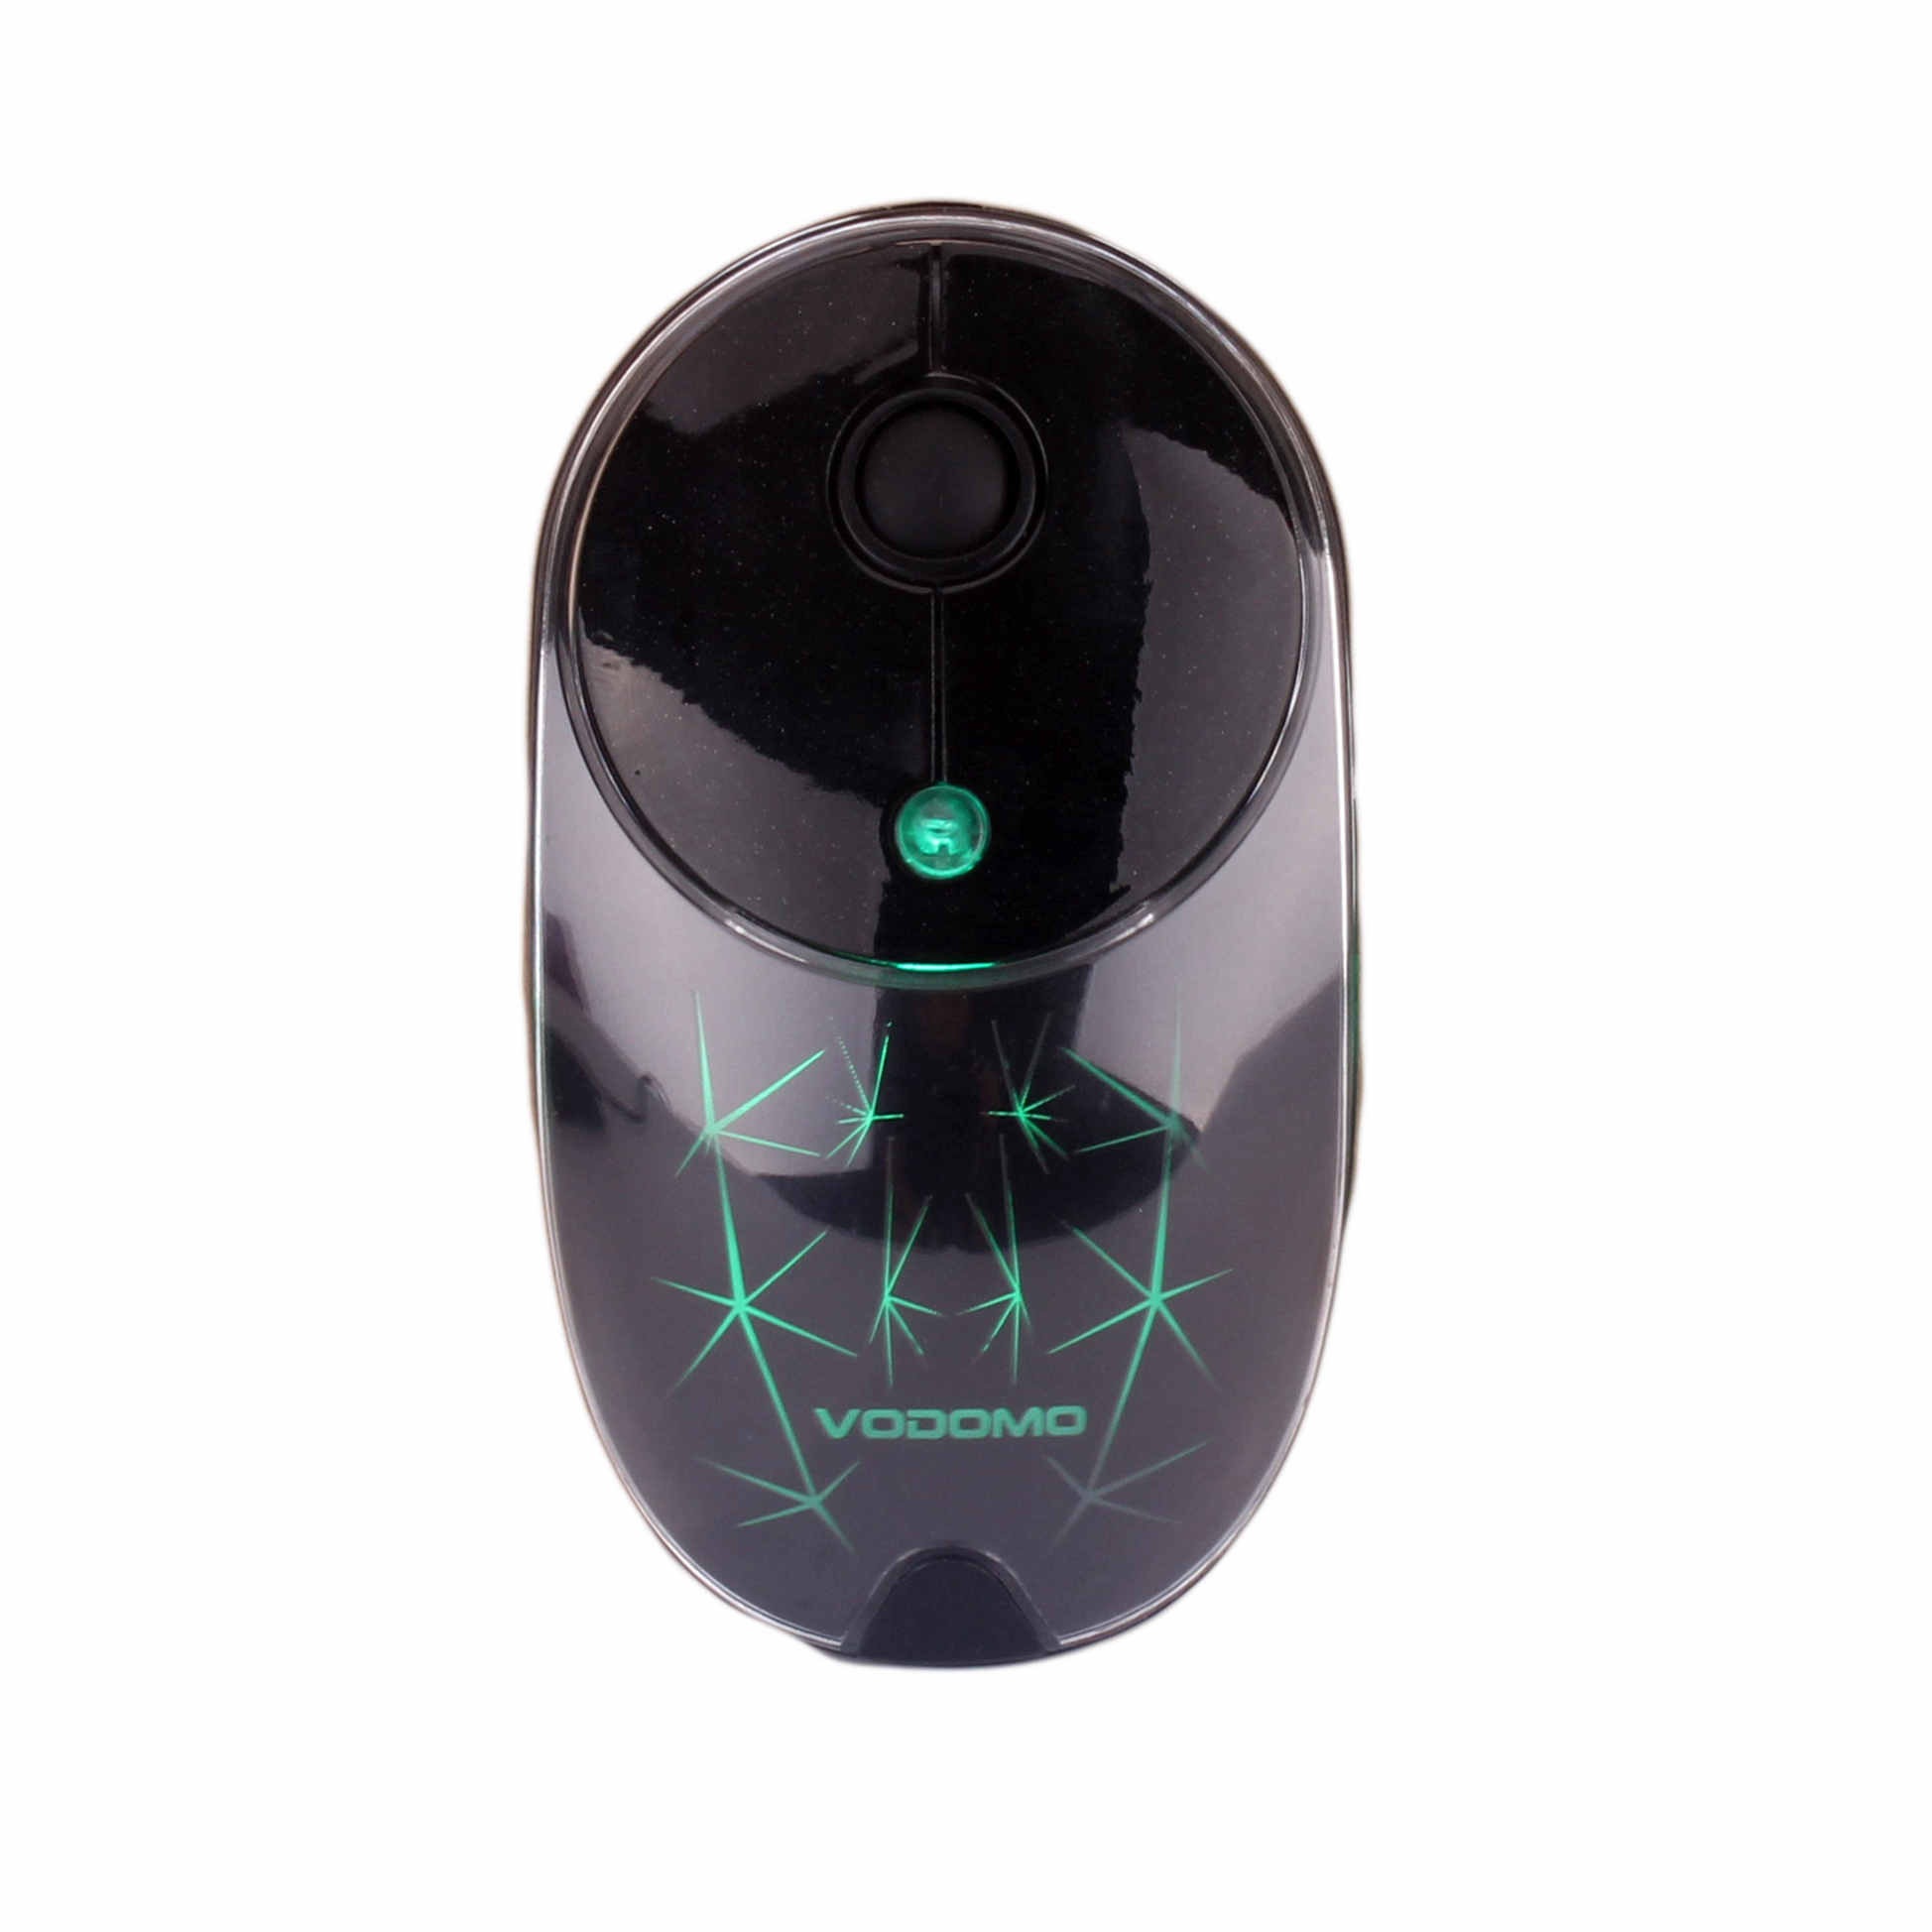 Chargeable Wireless Mouse with Backlight,Mute Key No Making Noise